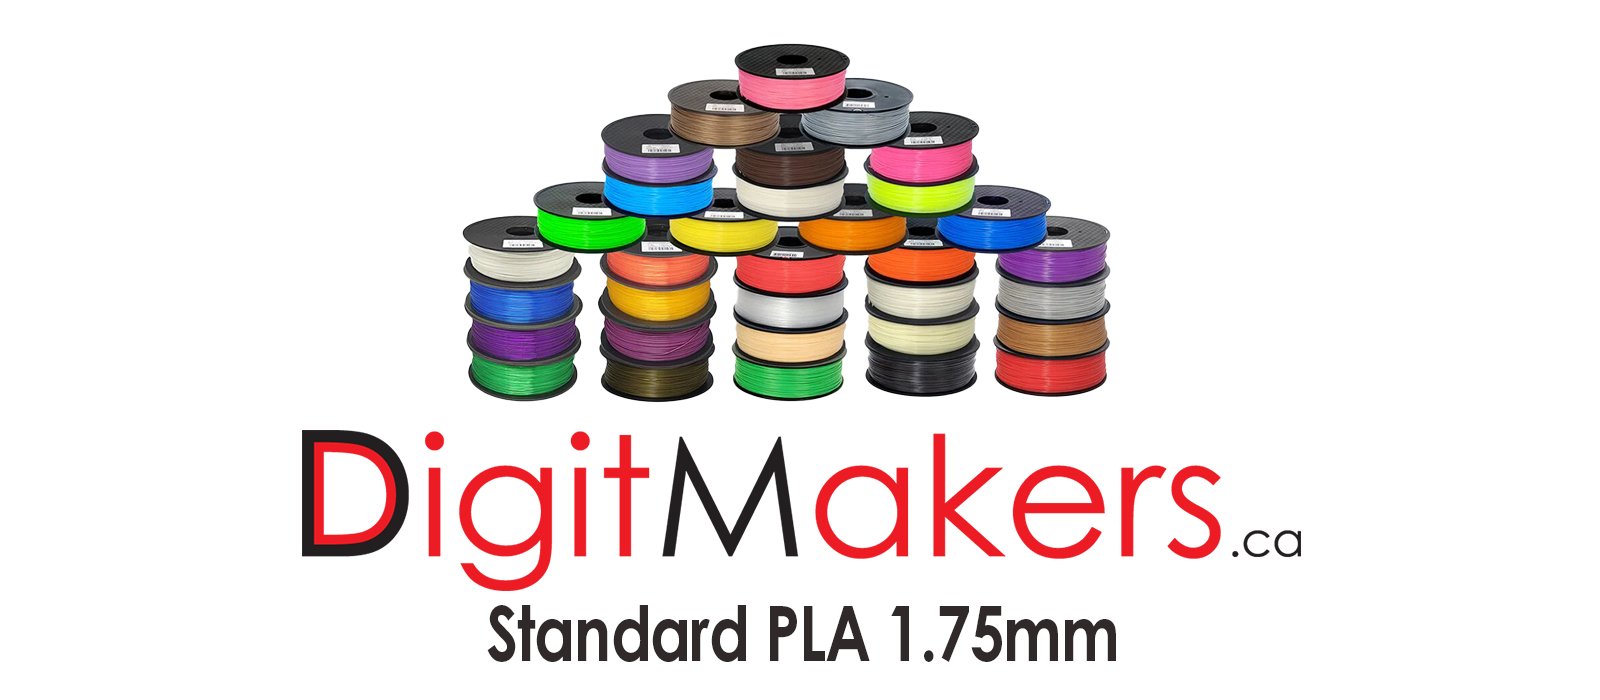 3D Filaments & PLA, Standard PLA 1.75 mm Largest Collection In Canada –